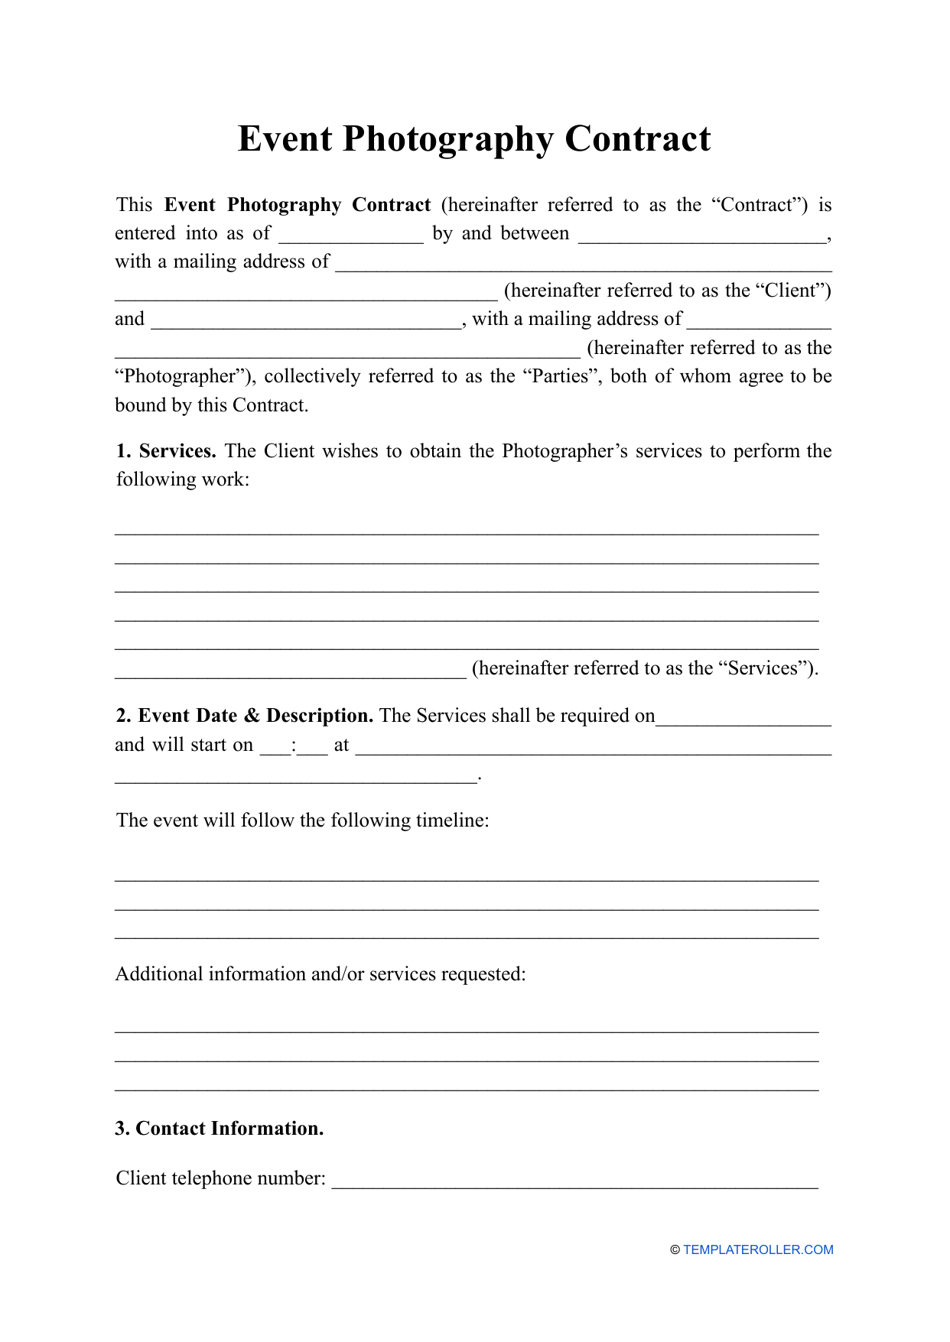 Event Photography Contract Template, Page 1